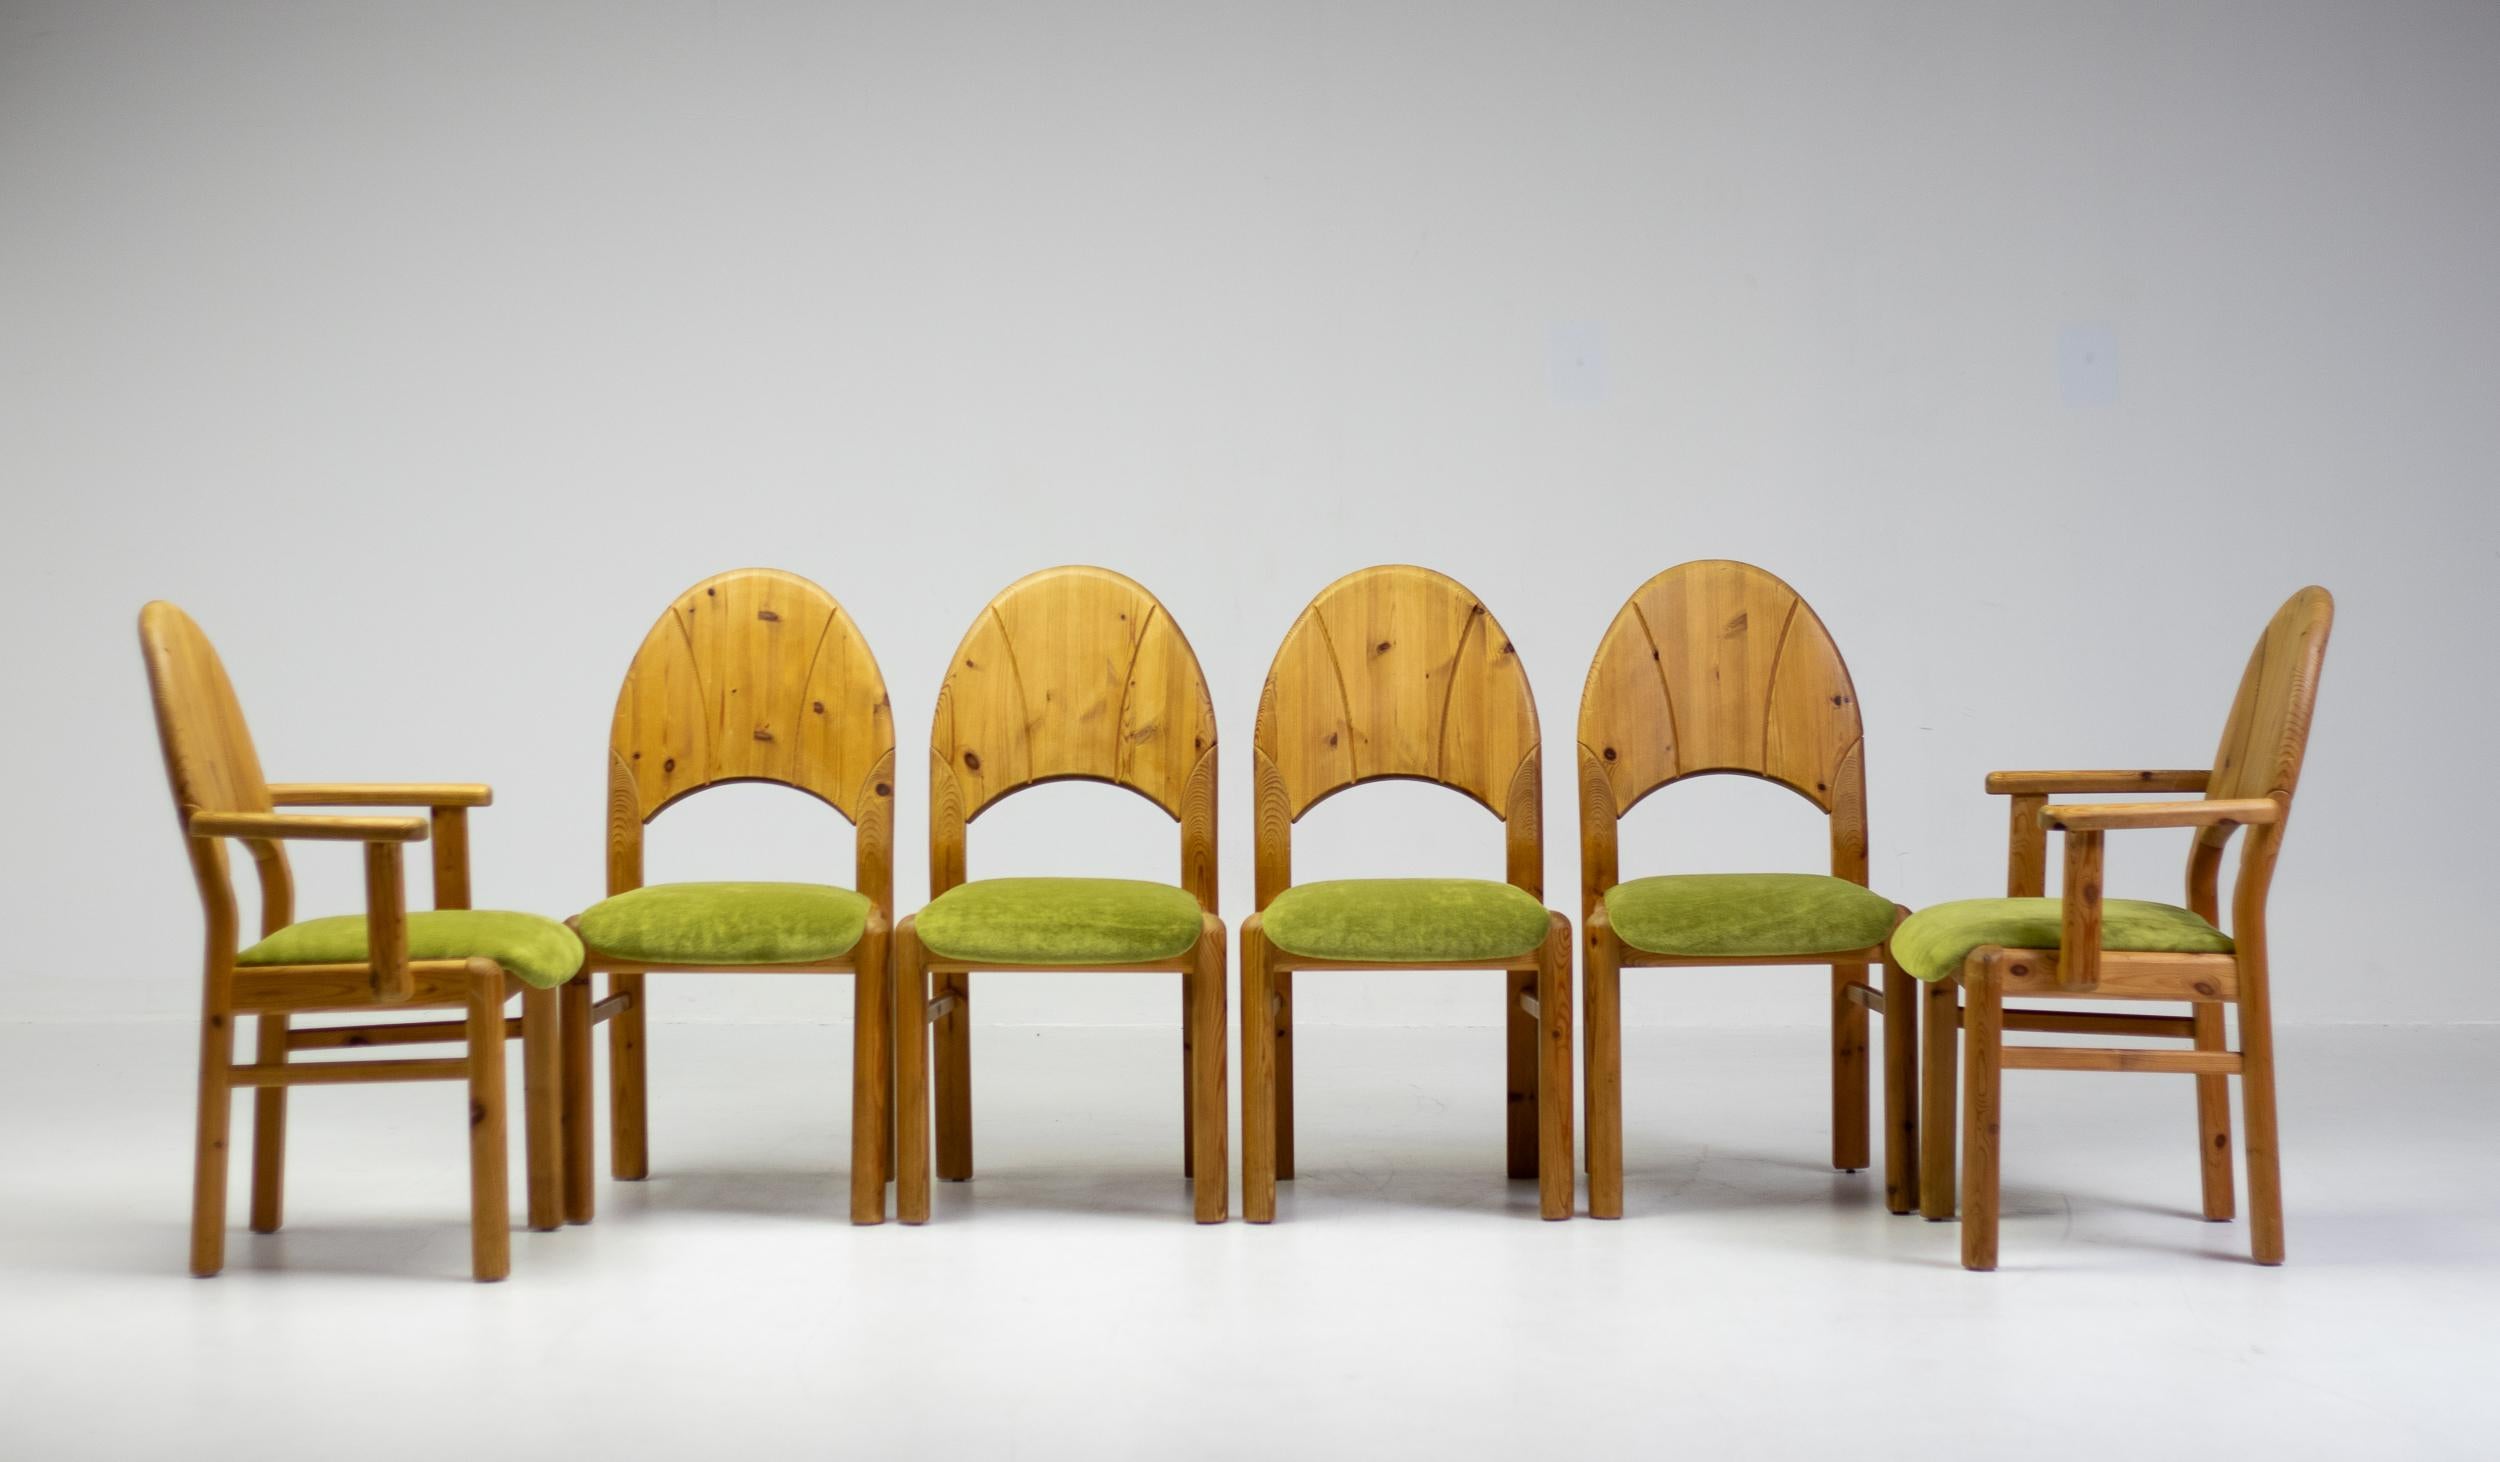 Wonderfully Scandinavian Mid Century Modern carved set of 4 side chairs and 2 arm chairs in Oregon pine with a new upholstery in grass green terry cloth. This is a very friendly and welcoming set. The dimensions are suitable for contemporary people,